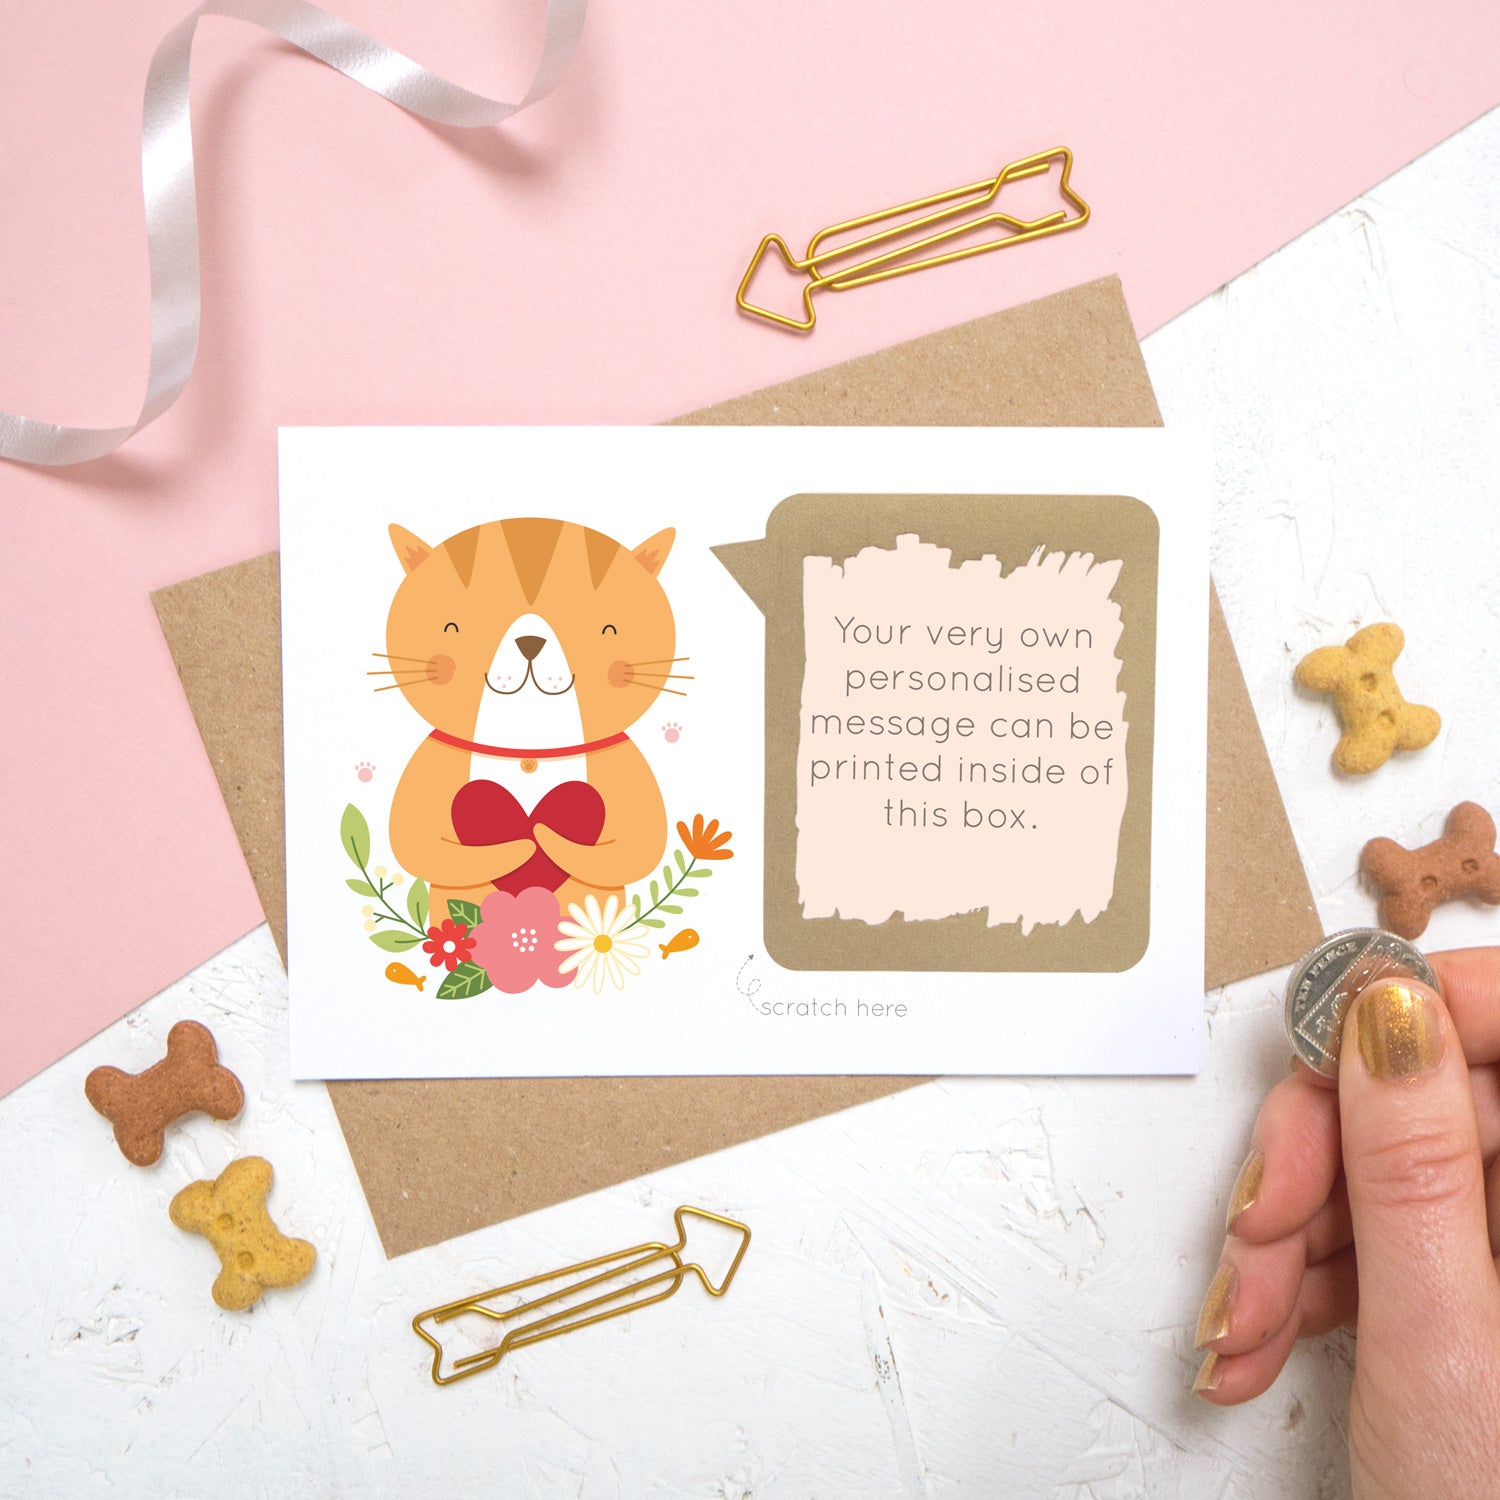 A personalised cat scratch card with the printed message revealed after it has been scratched off. The card is shot on a pink and white background with animal biscuits.